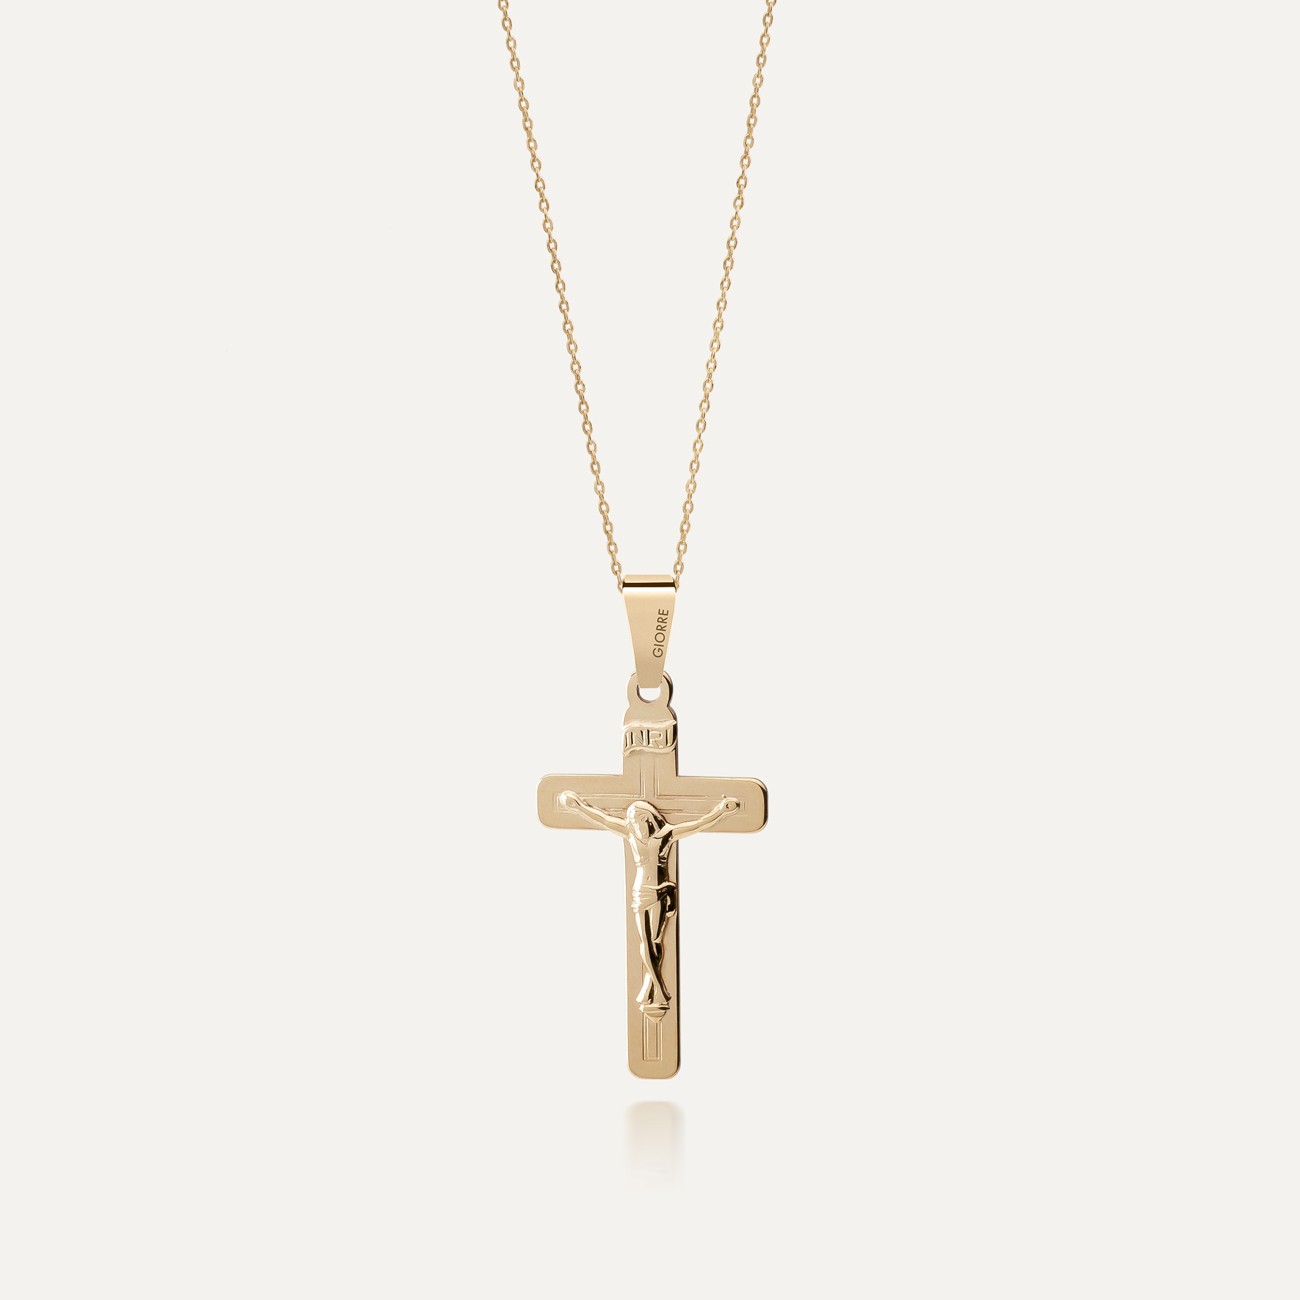 Gold necklace with a cross